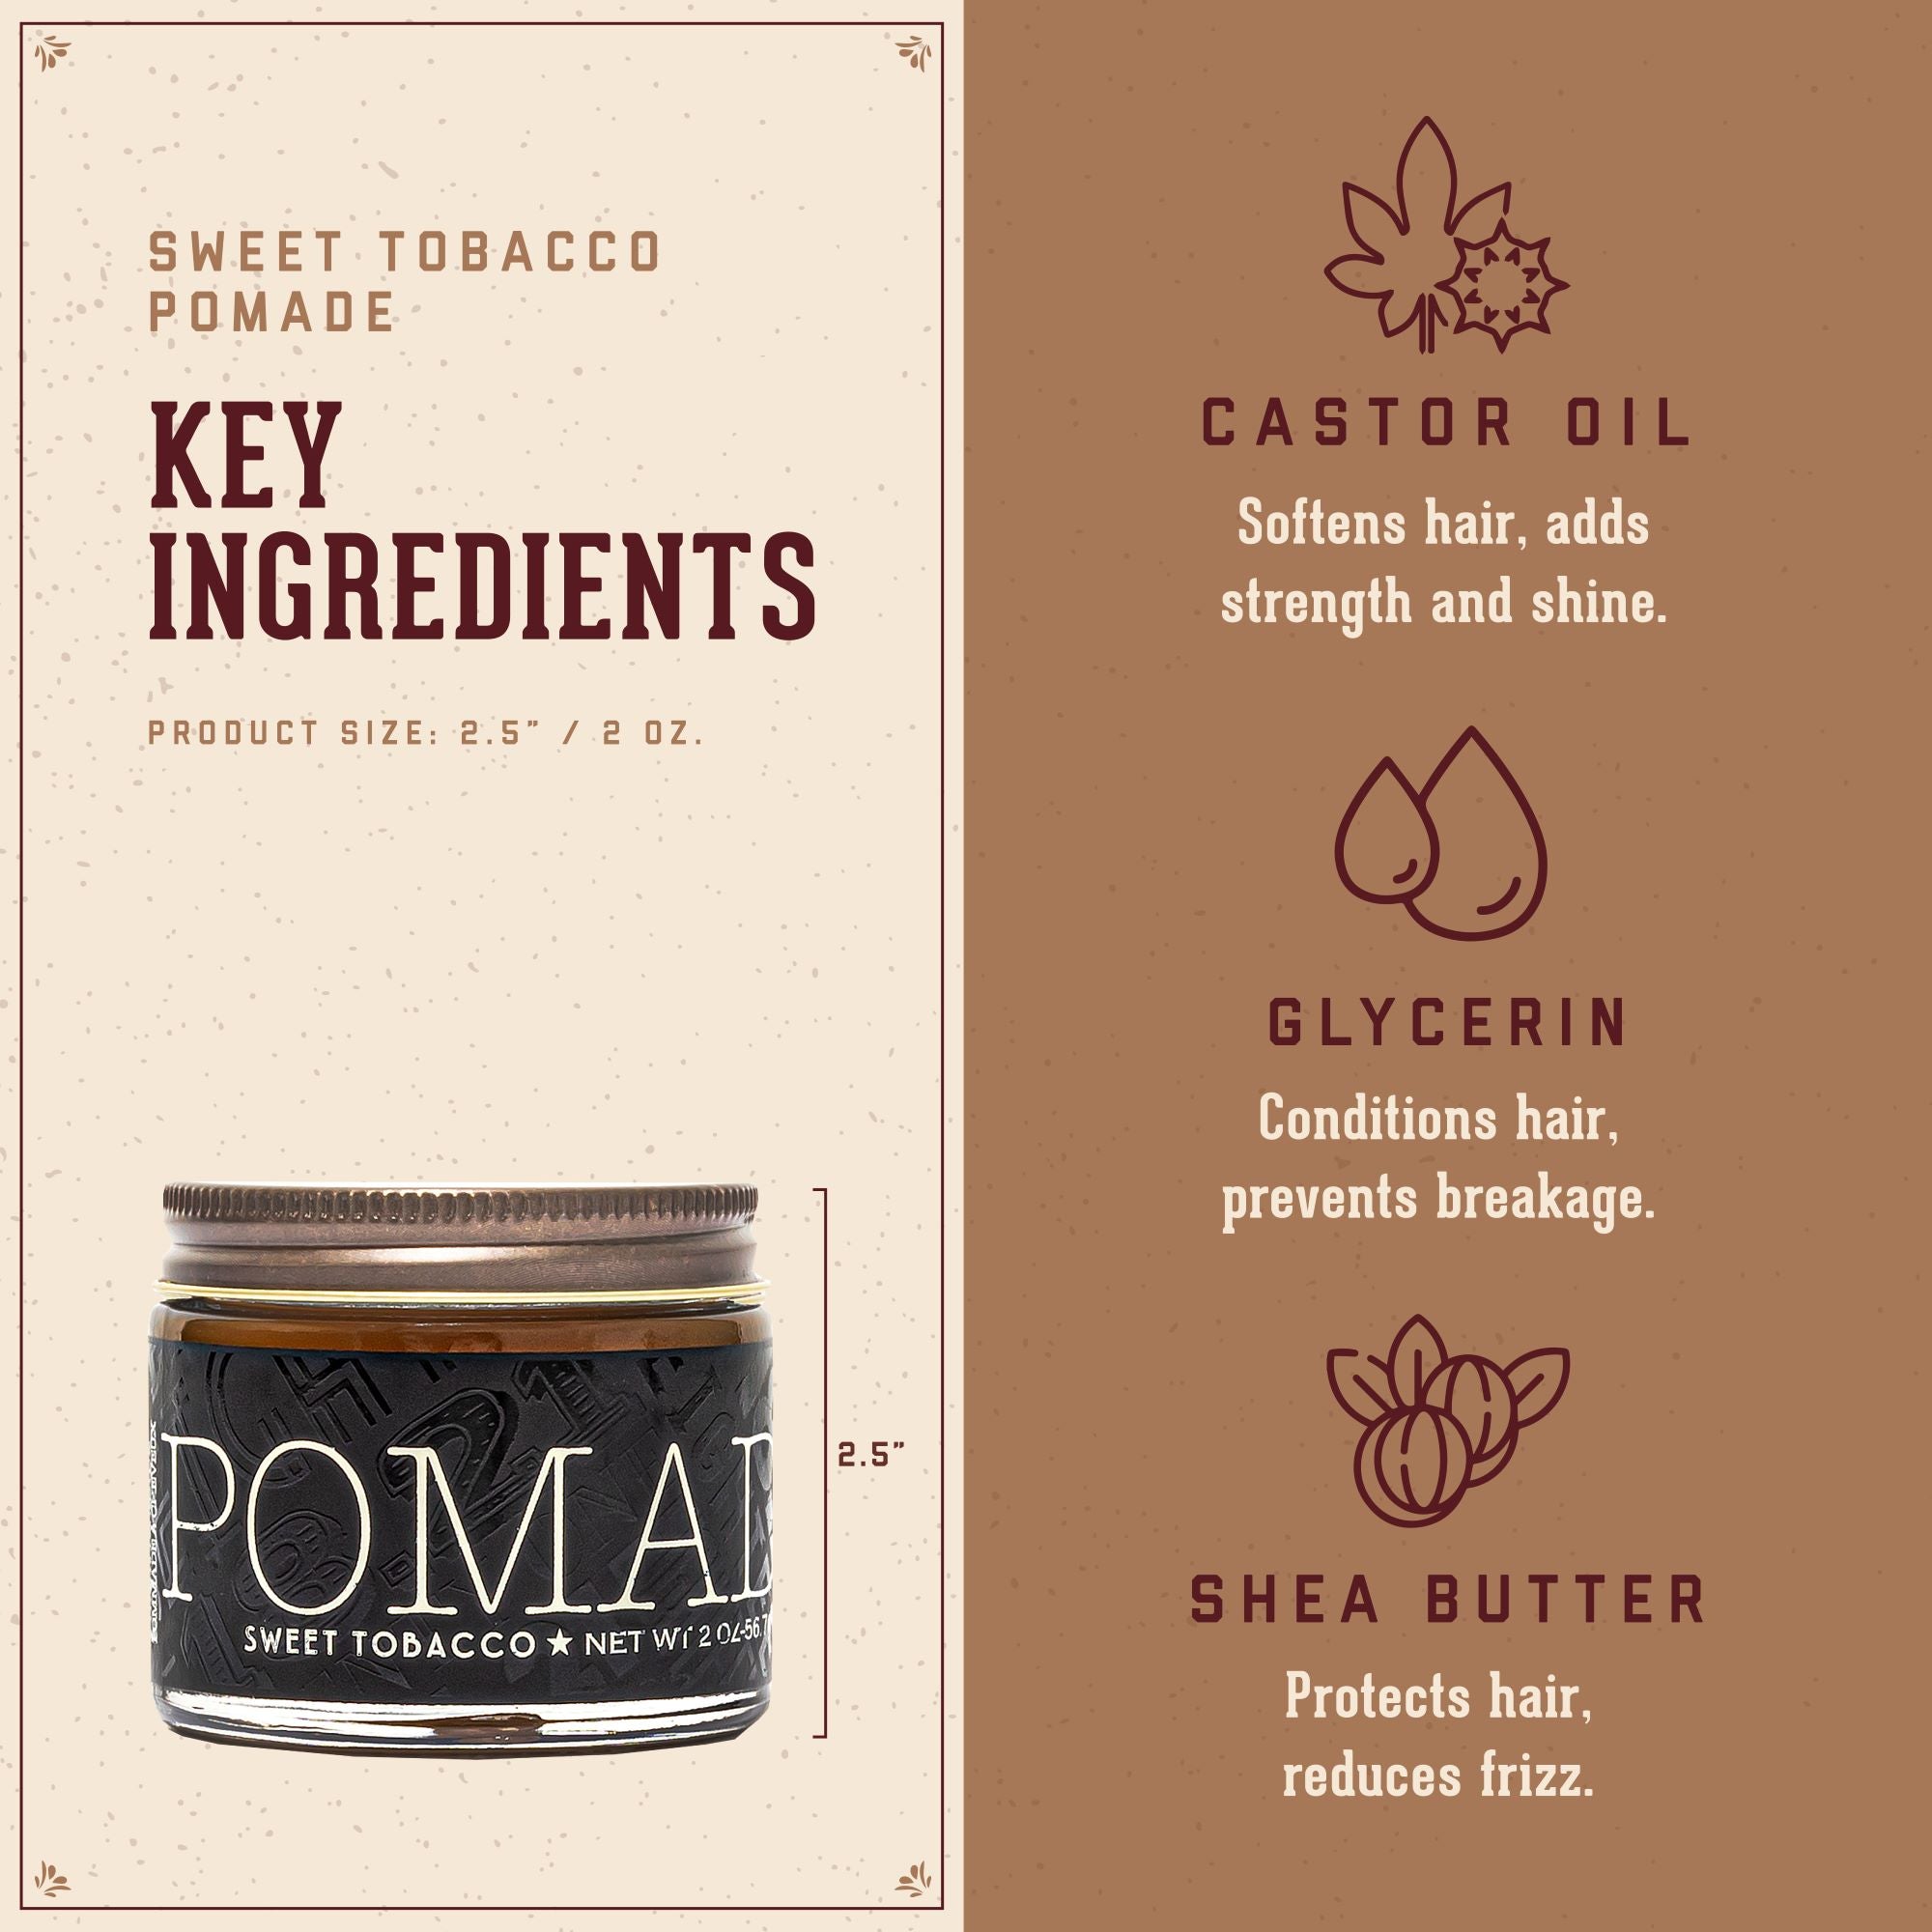 Sweet Tobacco Pomade Key Ingredients.  1. Castor Oil: softens hari, adds strength and shine.  2. Glycerin: conditions ahir, prevents breakage.  3. Shea Butter: protects hair and reduces frizz.